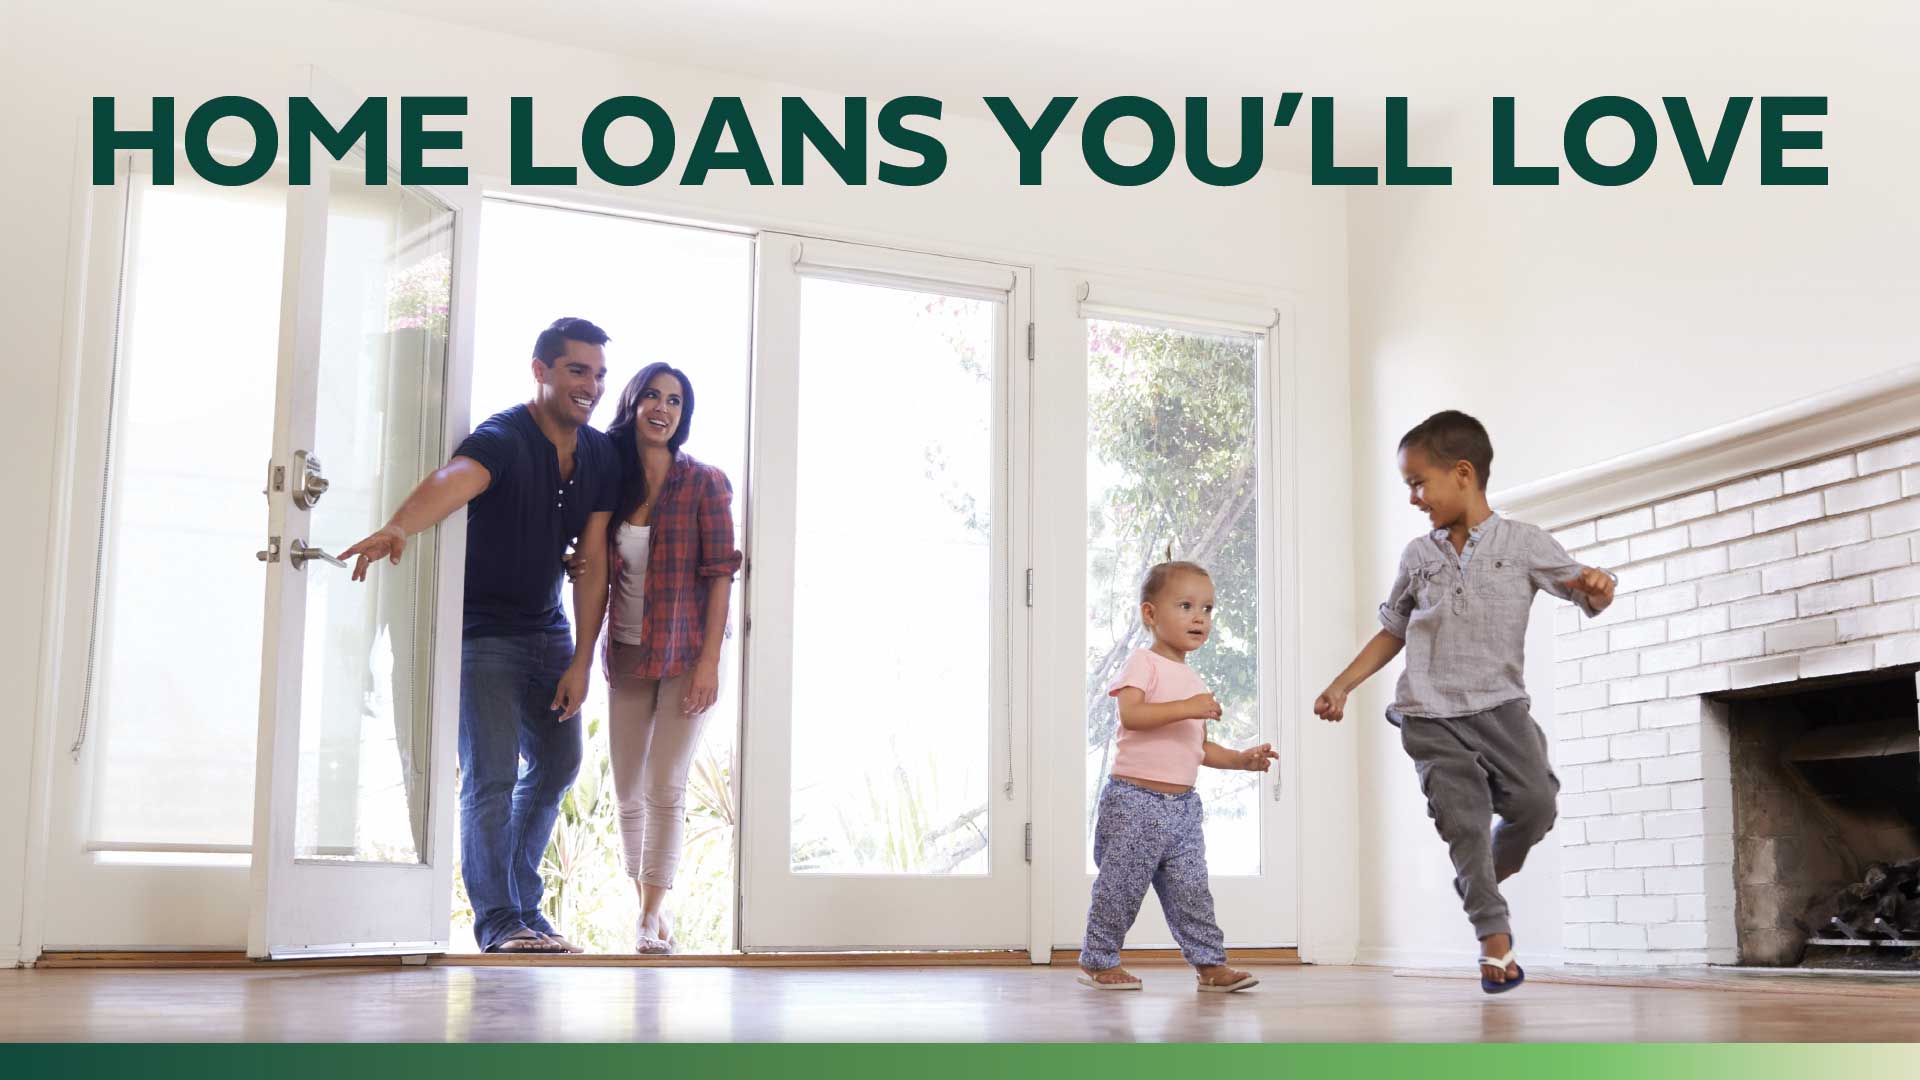 Home Loans You'll Love from GMFCU